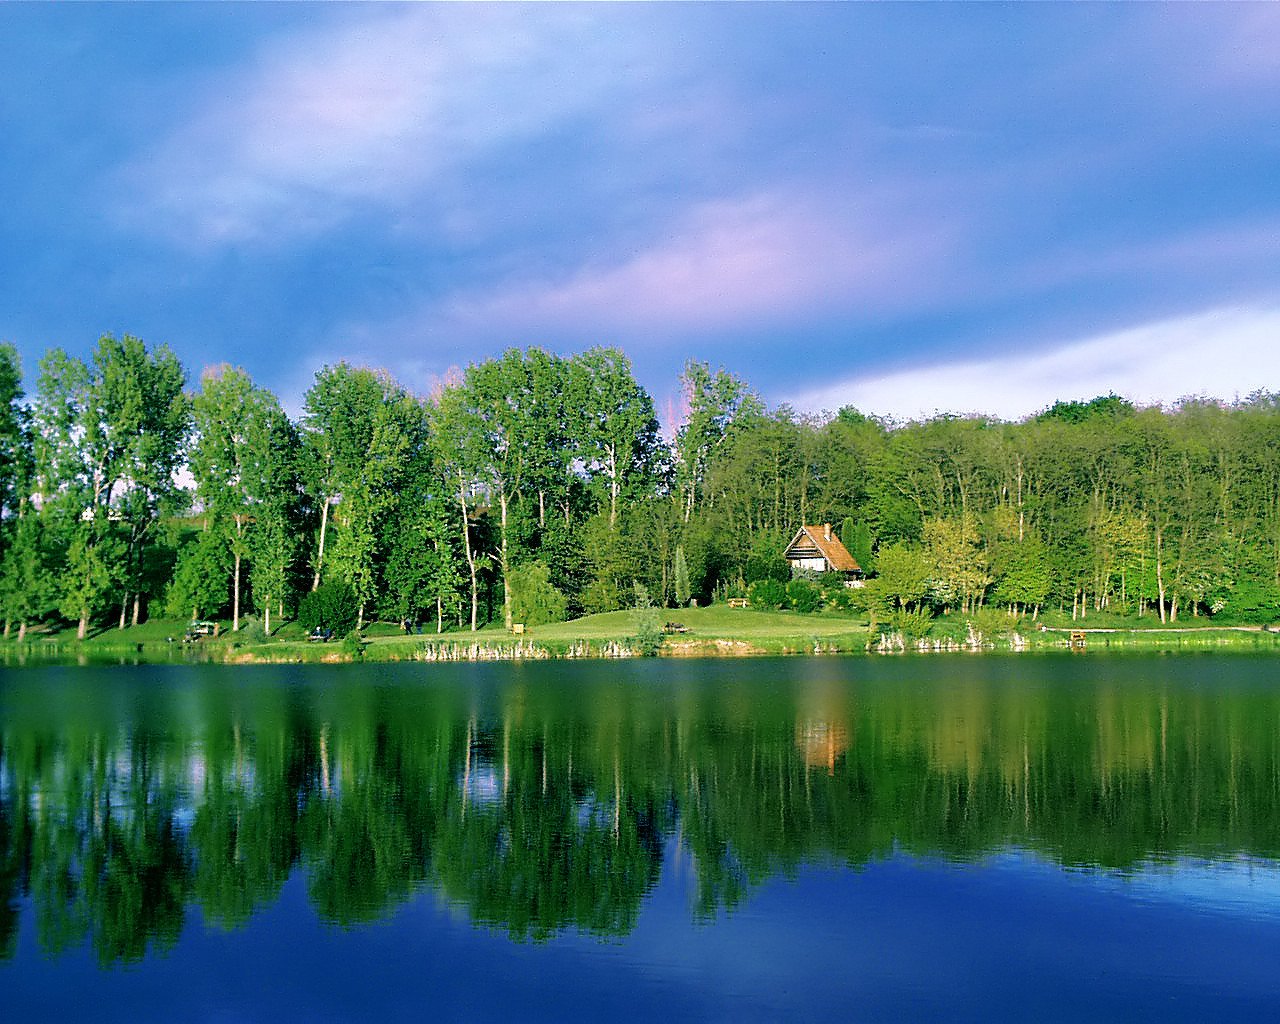 a calm lake surrounded by trees in the countryside